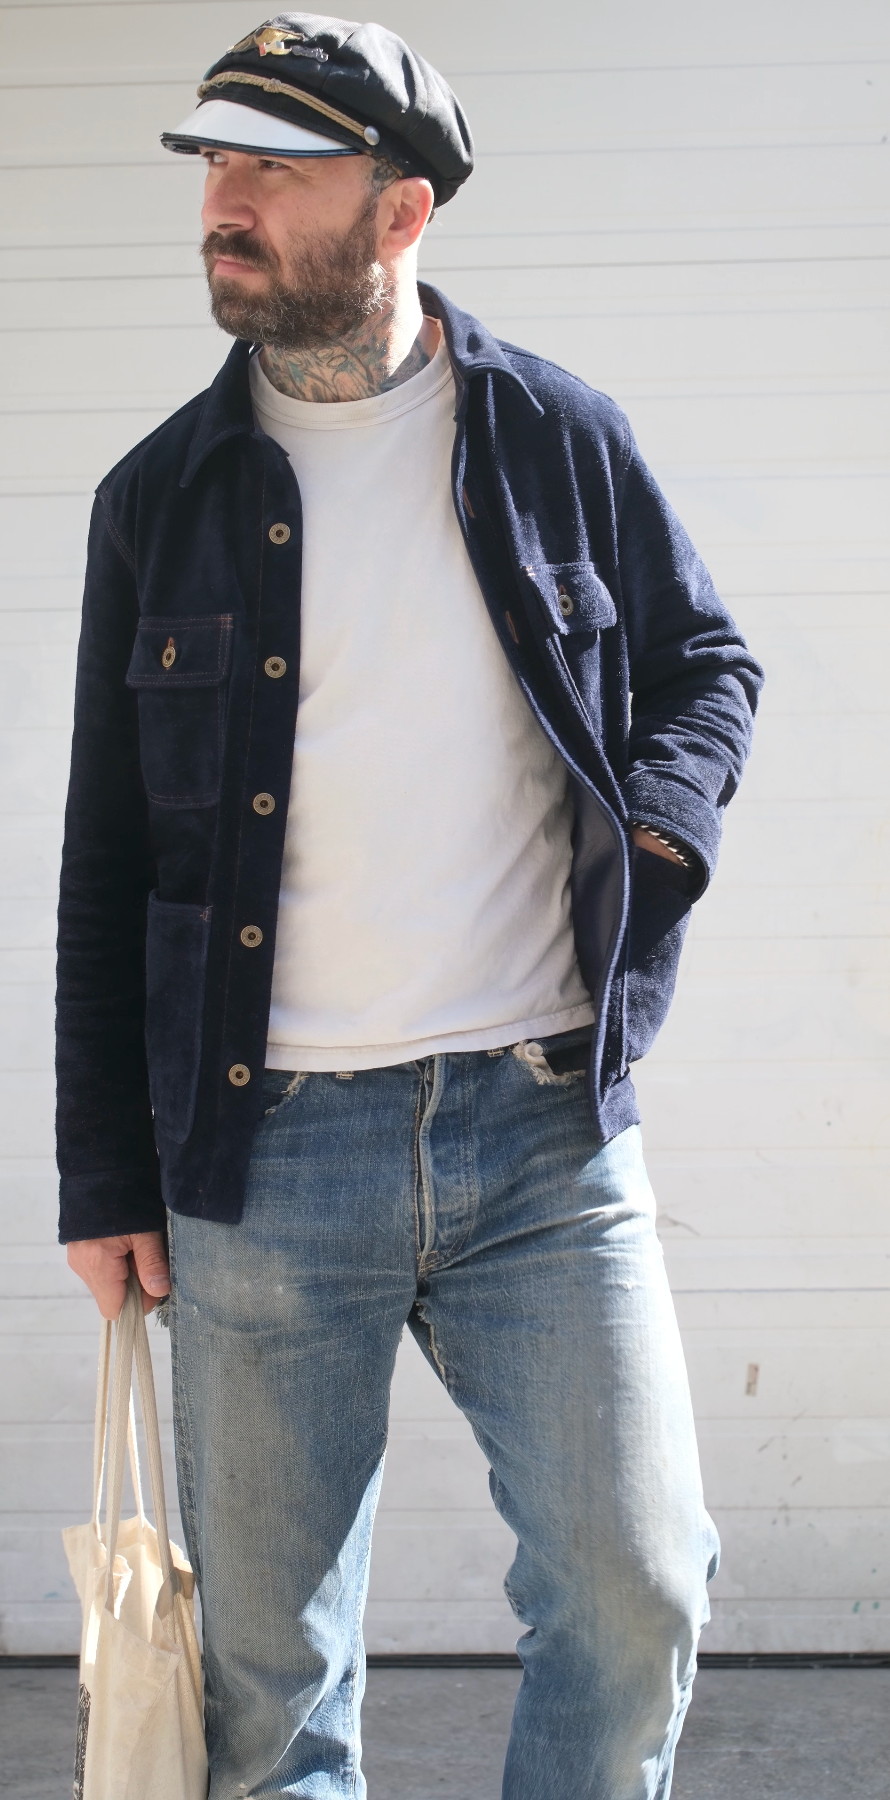 The Shop Vancouver Chore Shirt X Y&#39;2 Leather Steer rough out Navy